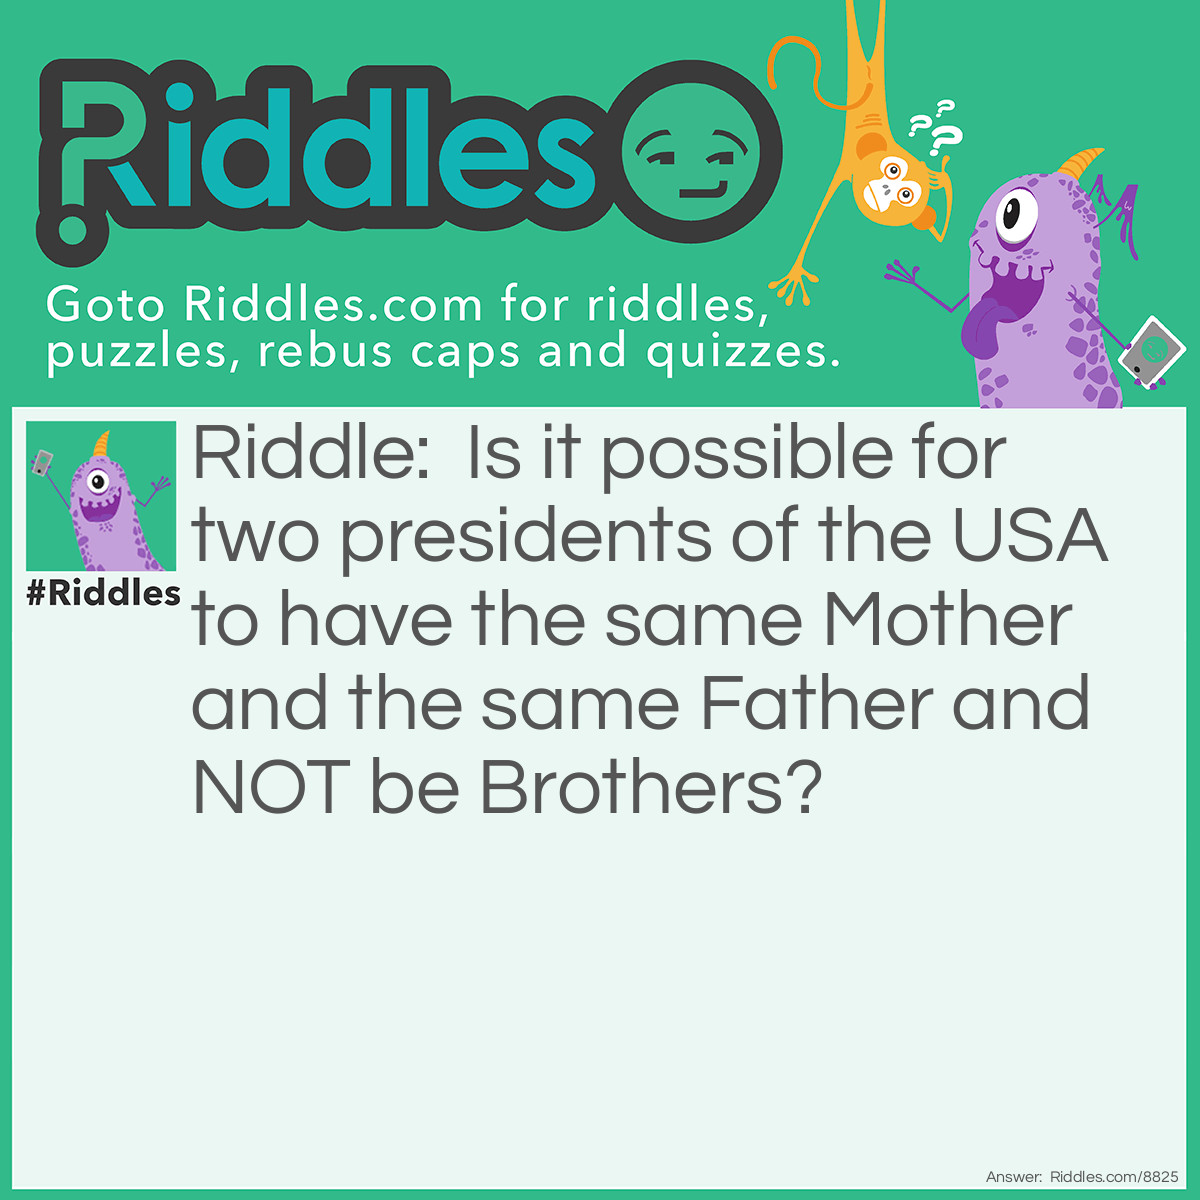 Riddle: Is it possible for two presidents of the USA to have the same Mother and the same Father and NOT be Brothers? Answer: Two answers: 1) They are the same person - Namely President 22 and 24 were the same person. 2) One is a sister.